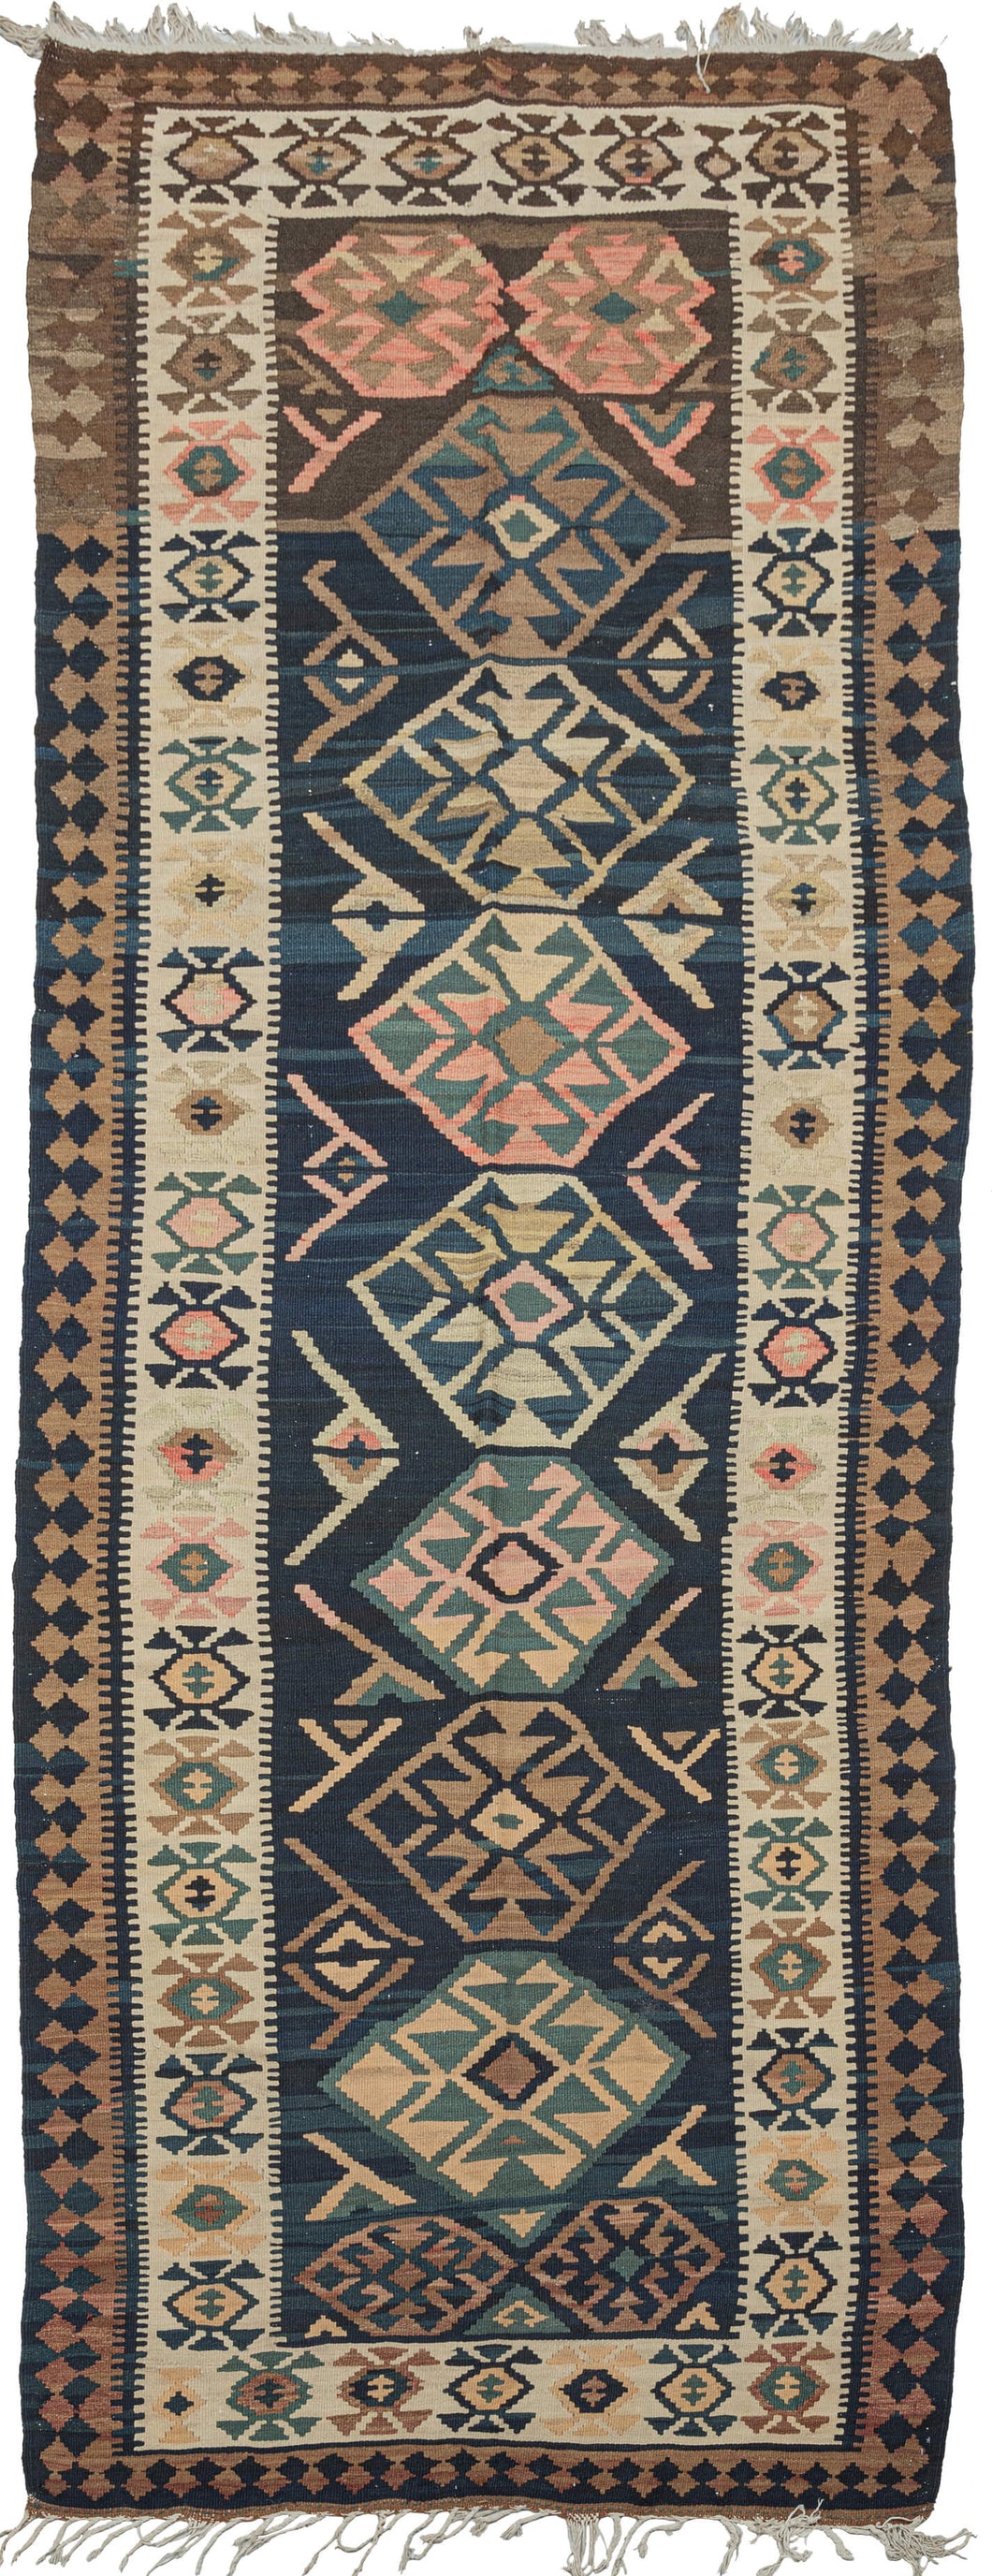 NW Persian kelleghi kilim runner featuring a stunning indigo blue field, with a bold geometric design of medallions and line shapes. Soft browns, ivories and watermelon complete the color palette.